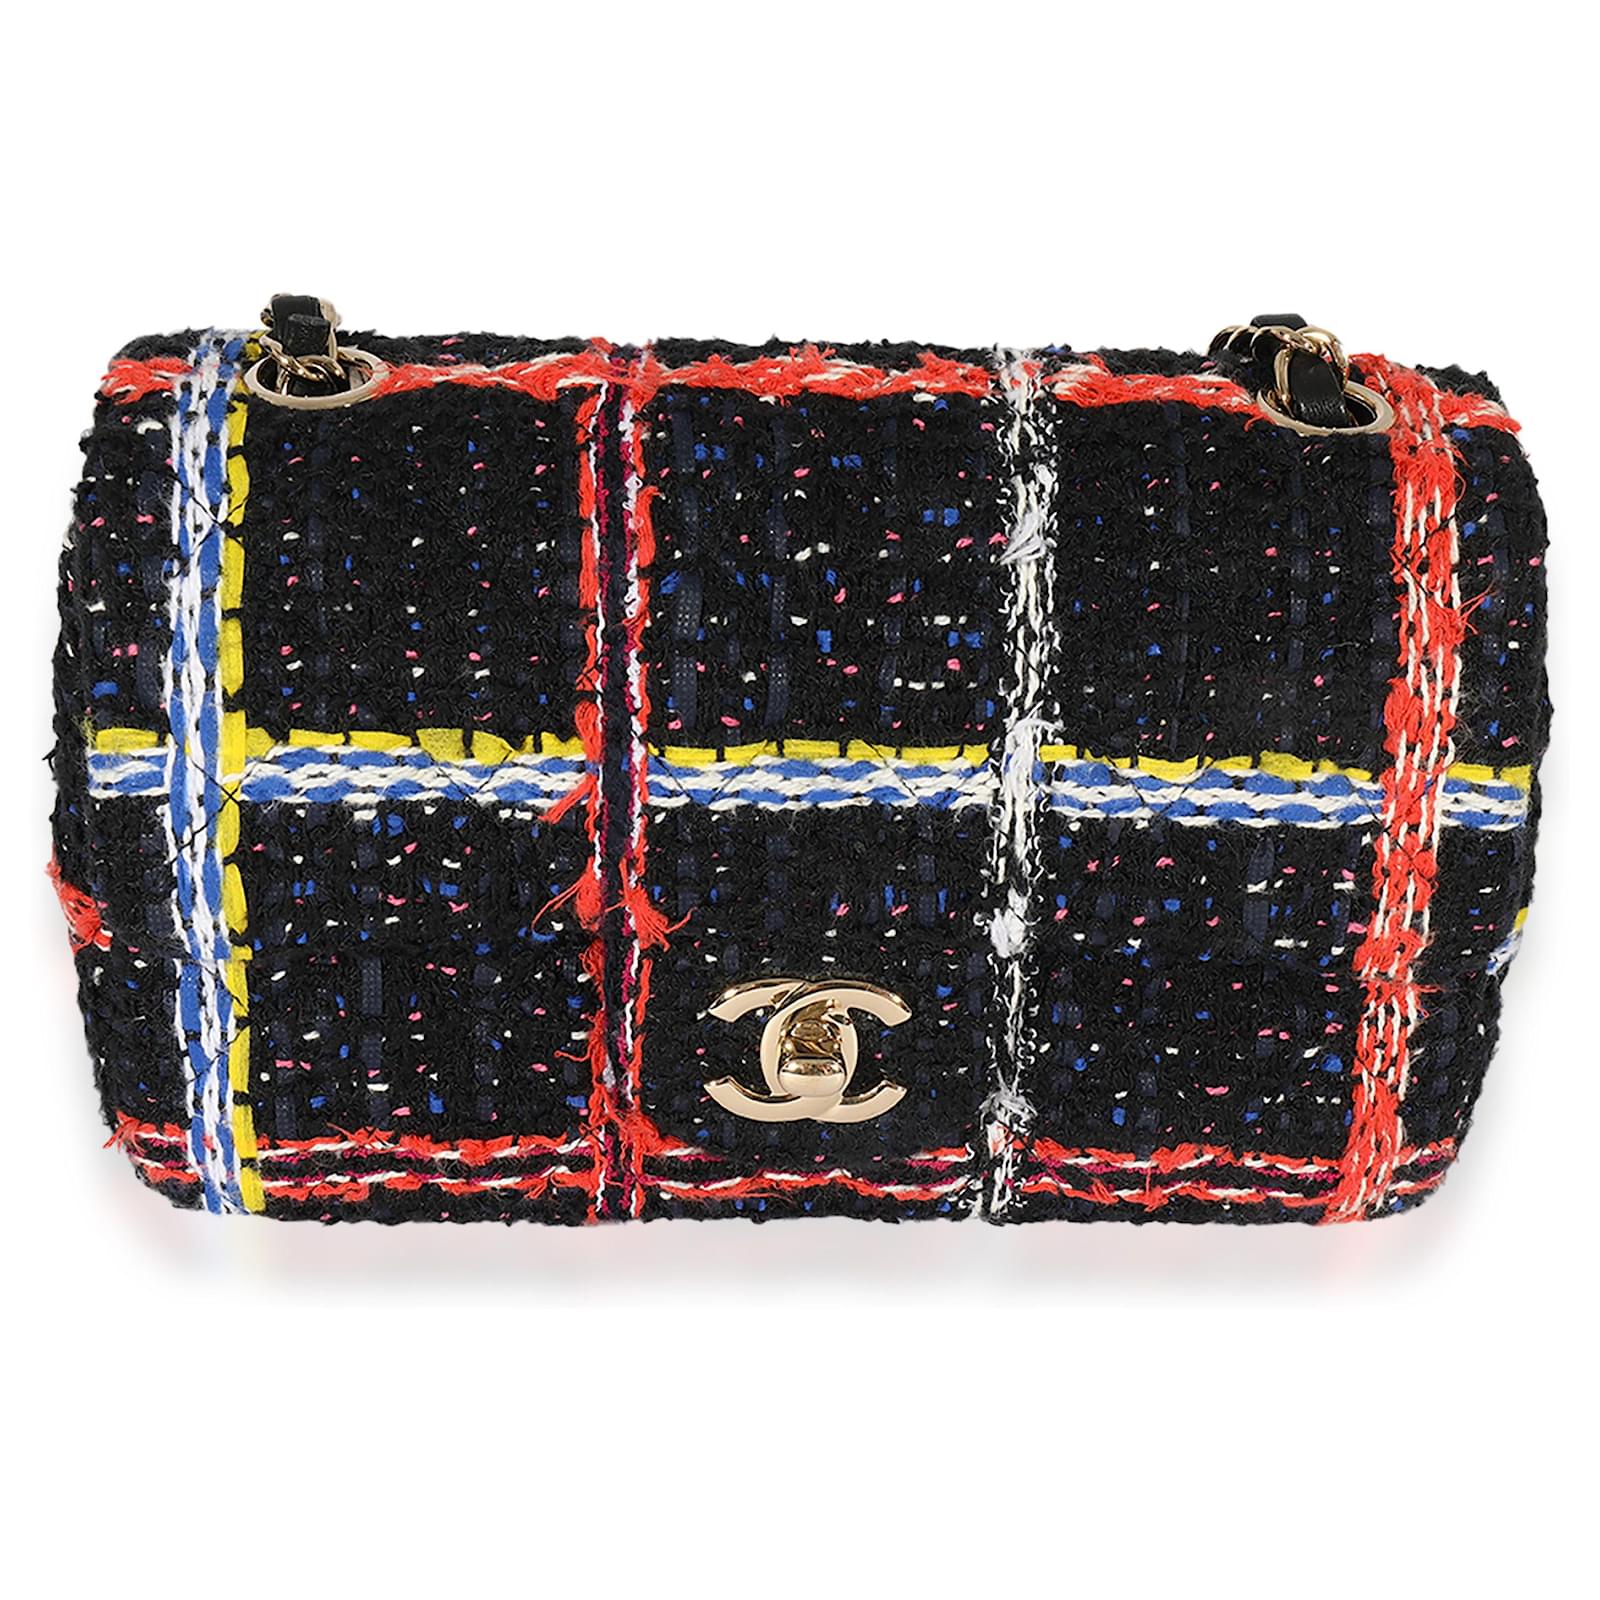 Vintage Chanel from the sustainable luxury webshop Still in Fashion